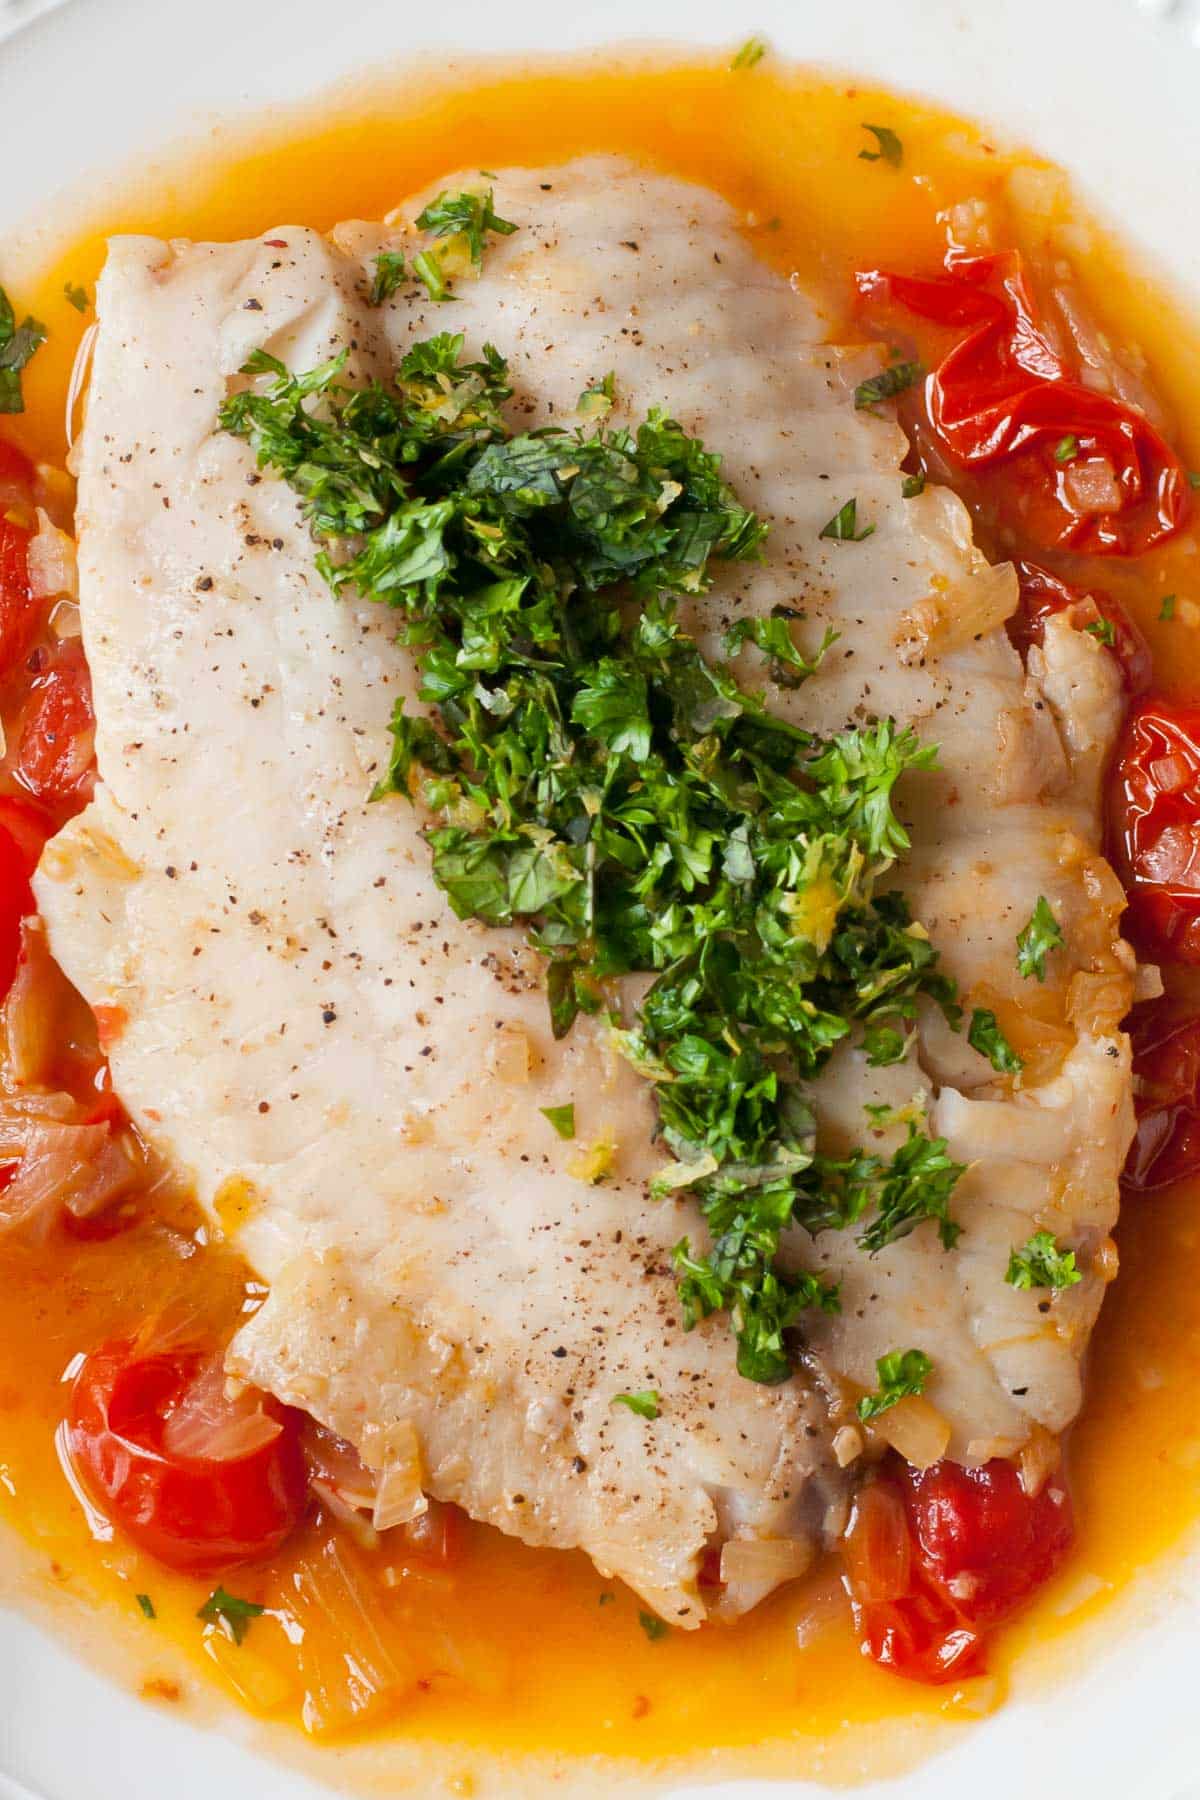 Tilapia filet poached in tomato goop with fresh parsley and mint.